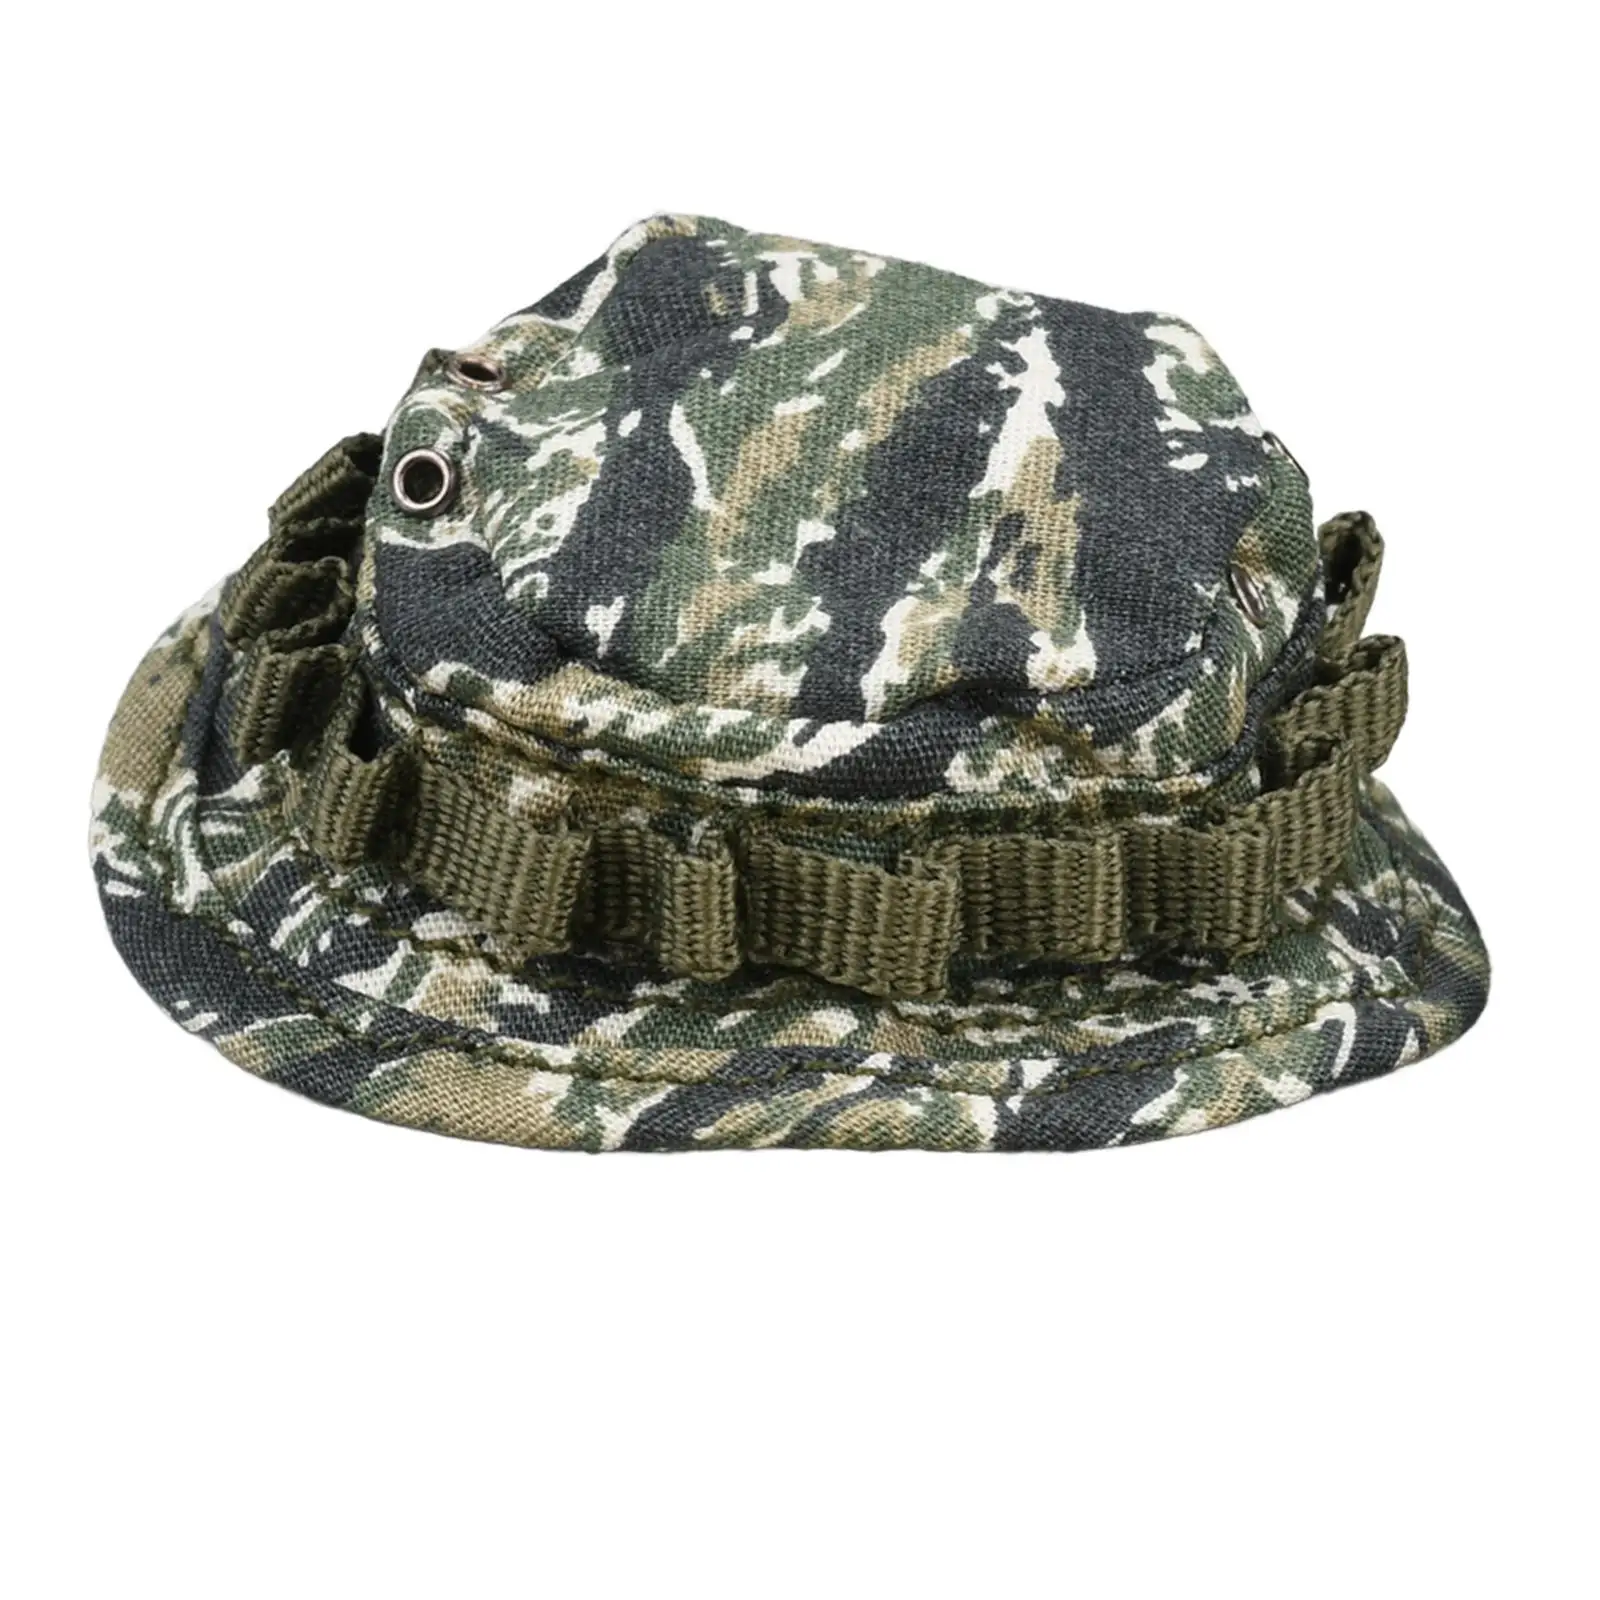 1/6 Scale Soldier Hat Model Pretend Play Decor for 12`` inch Soldier Figures